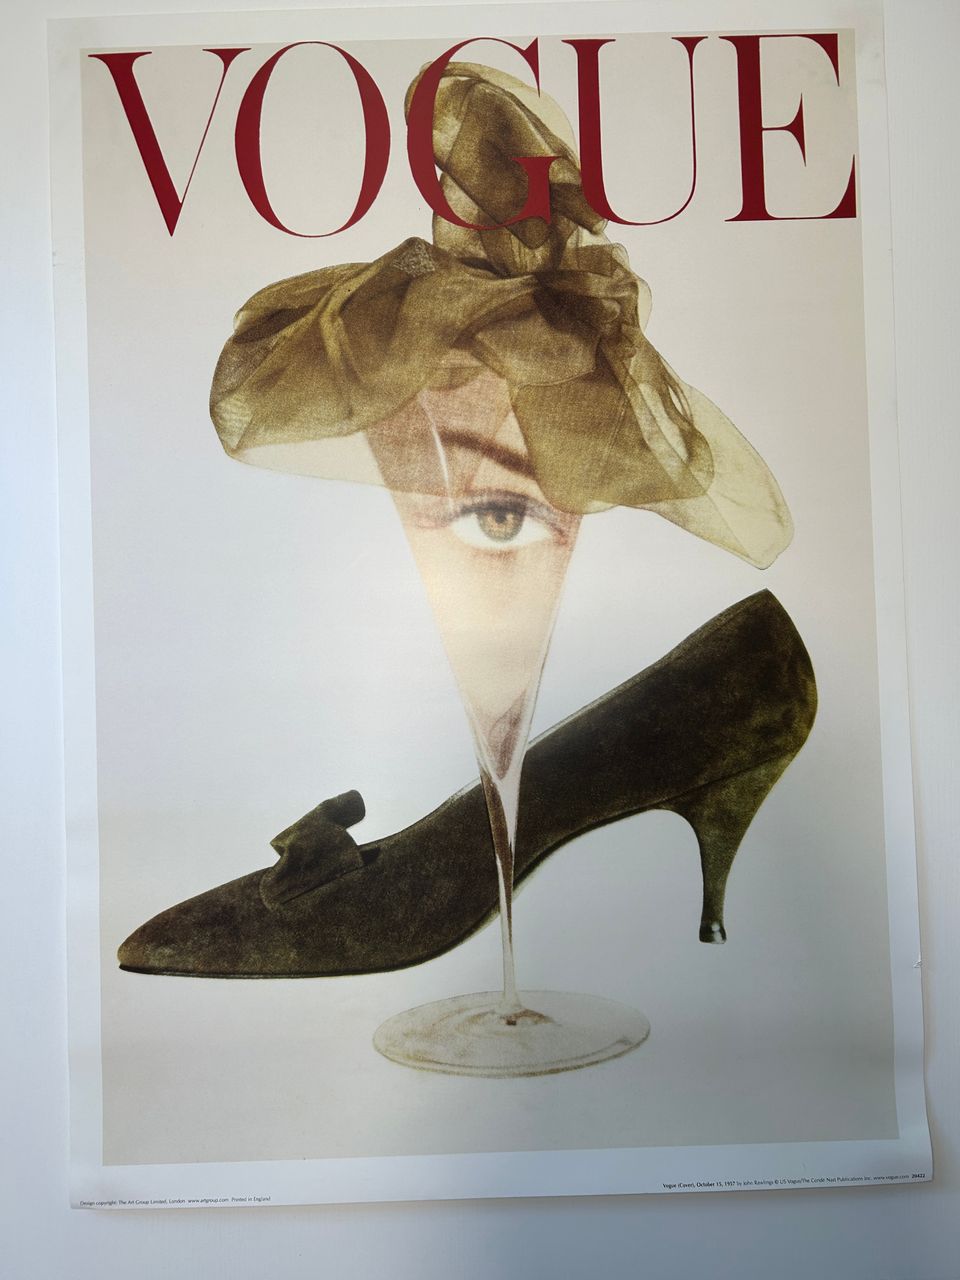 Vogue (Cover), October 15, 1957 by John Rawlings - Print - 50 x 70 cm